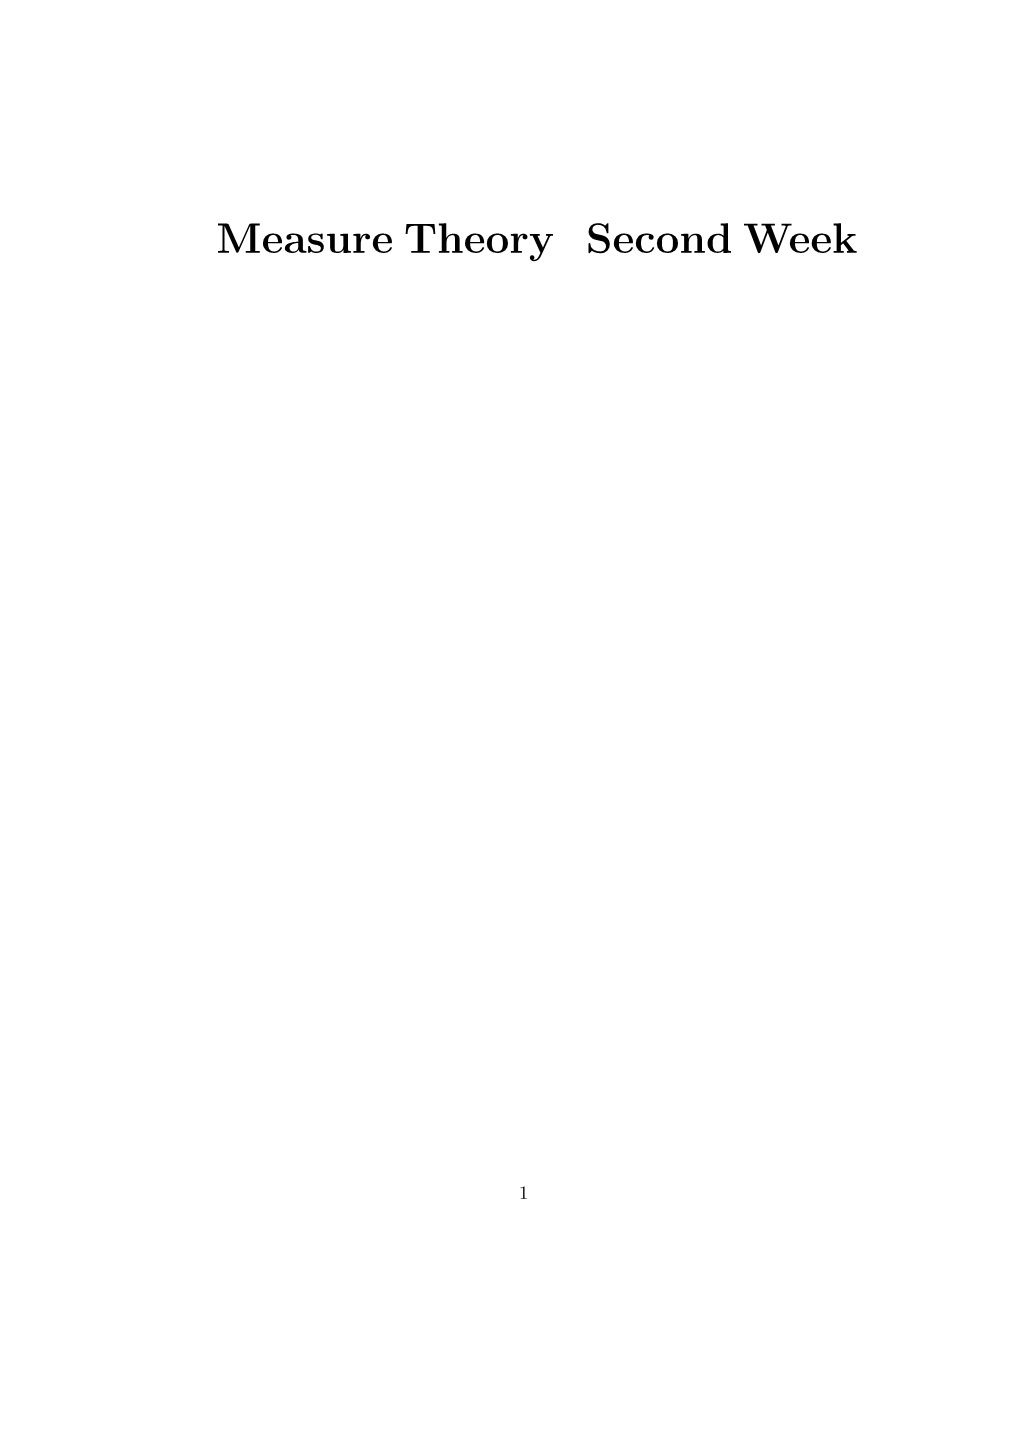 Measure Theory Notes Week 2